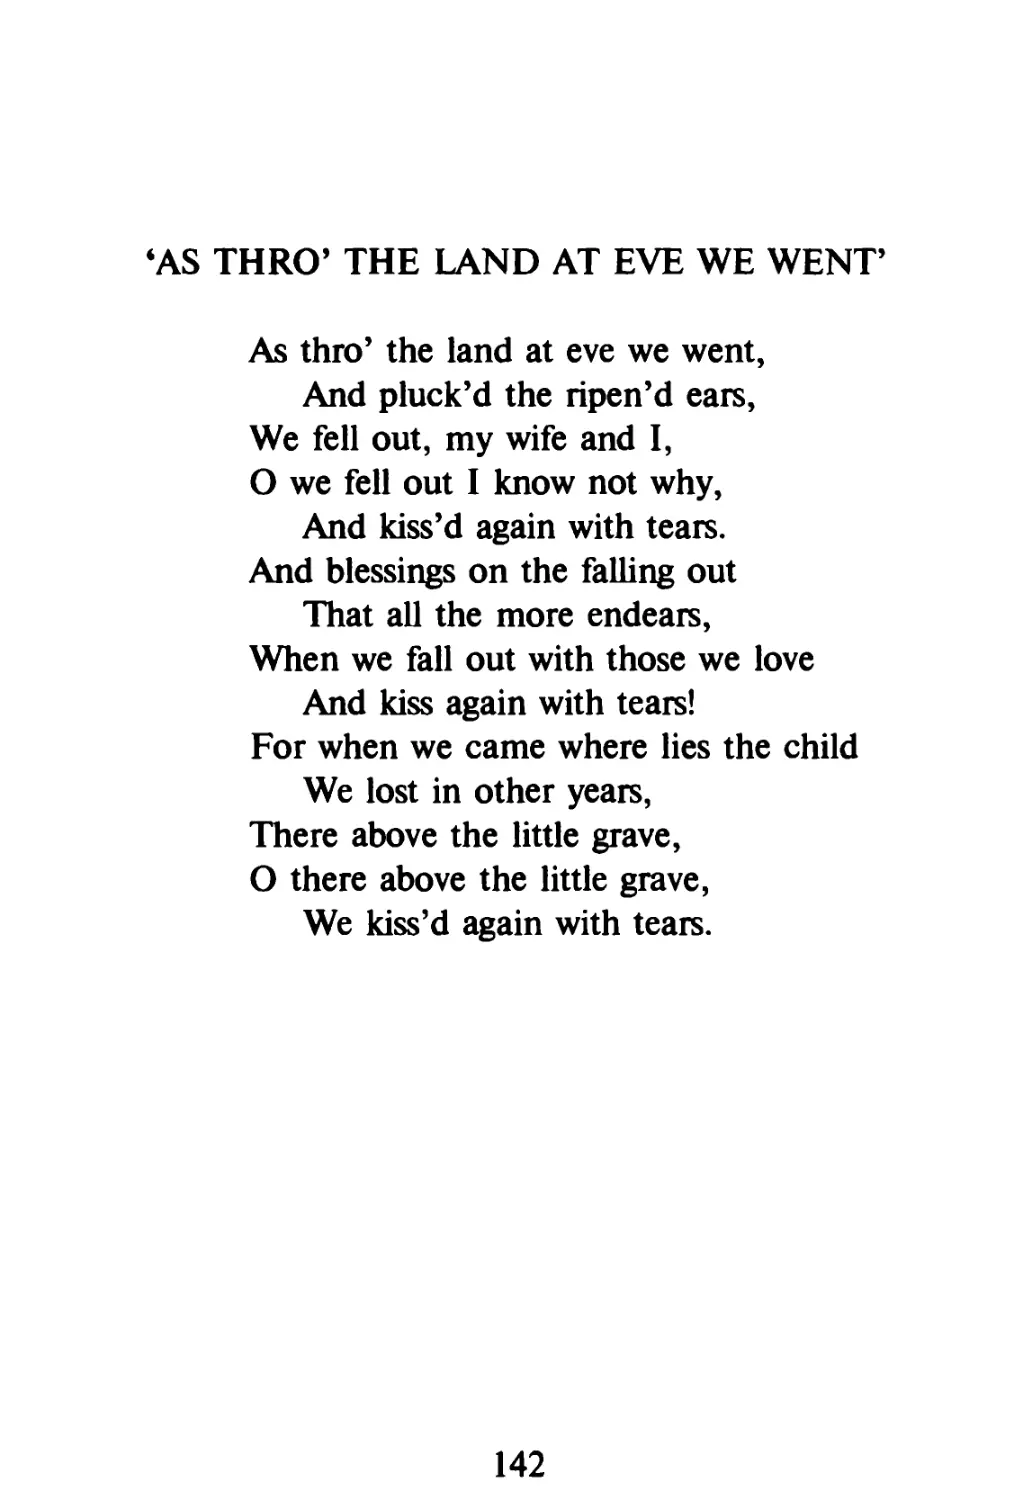 'As thro' the land at eve we went'